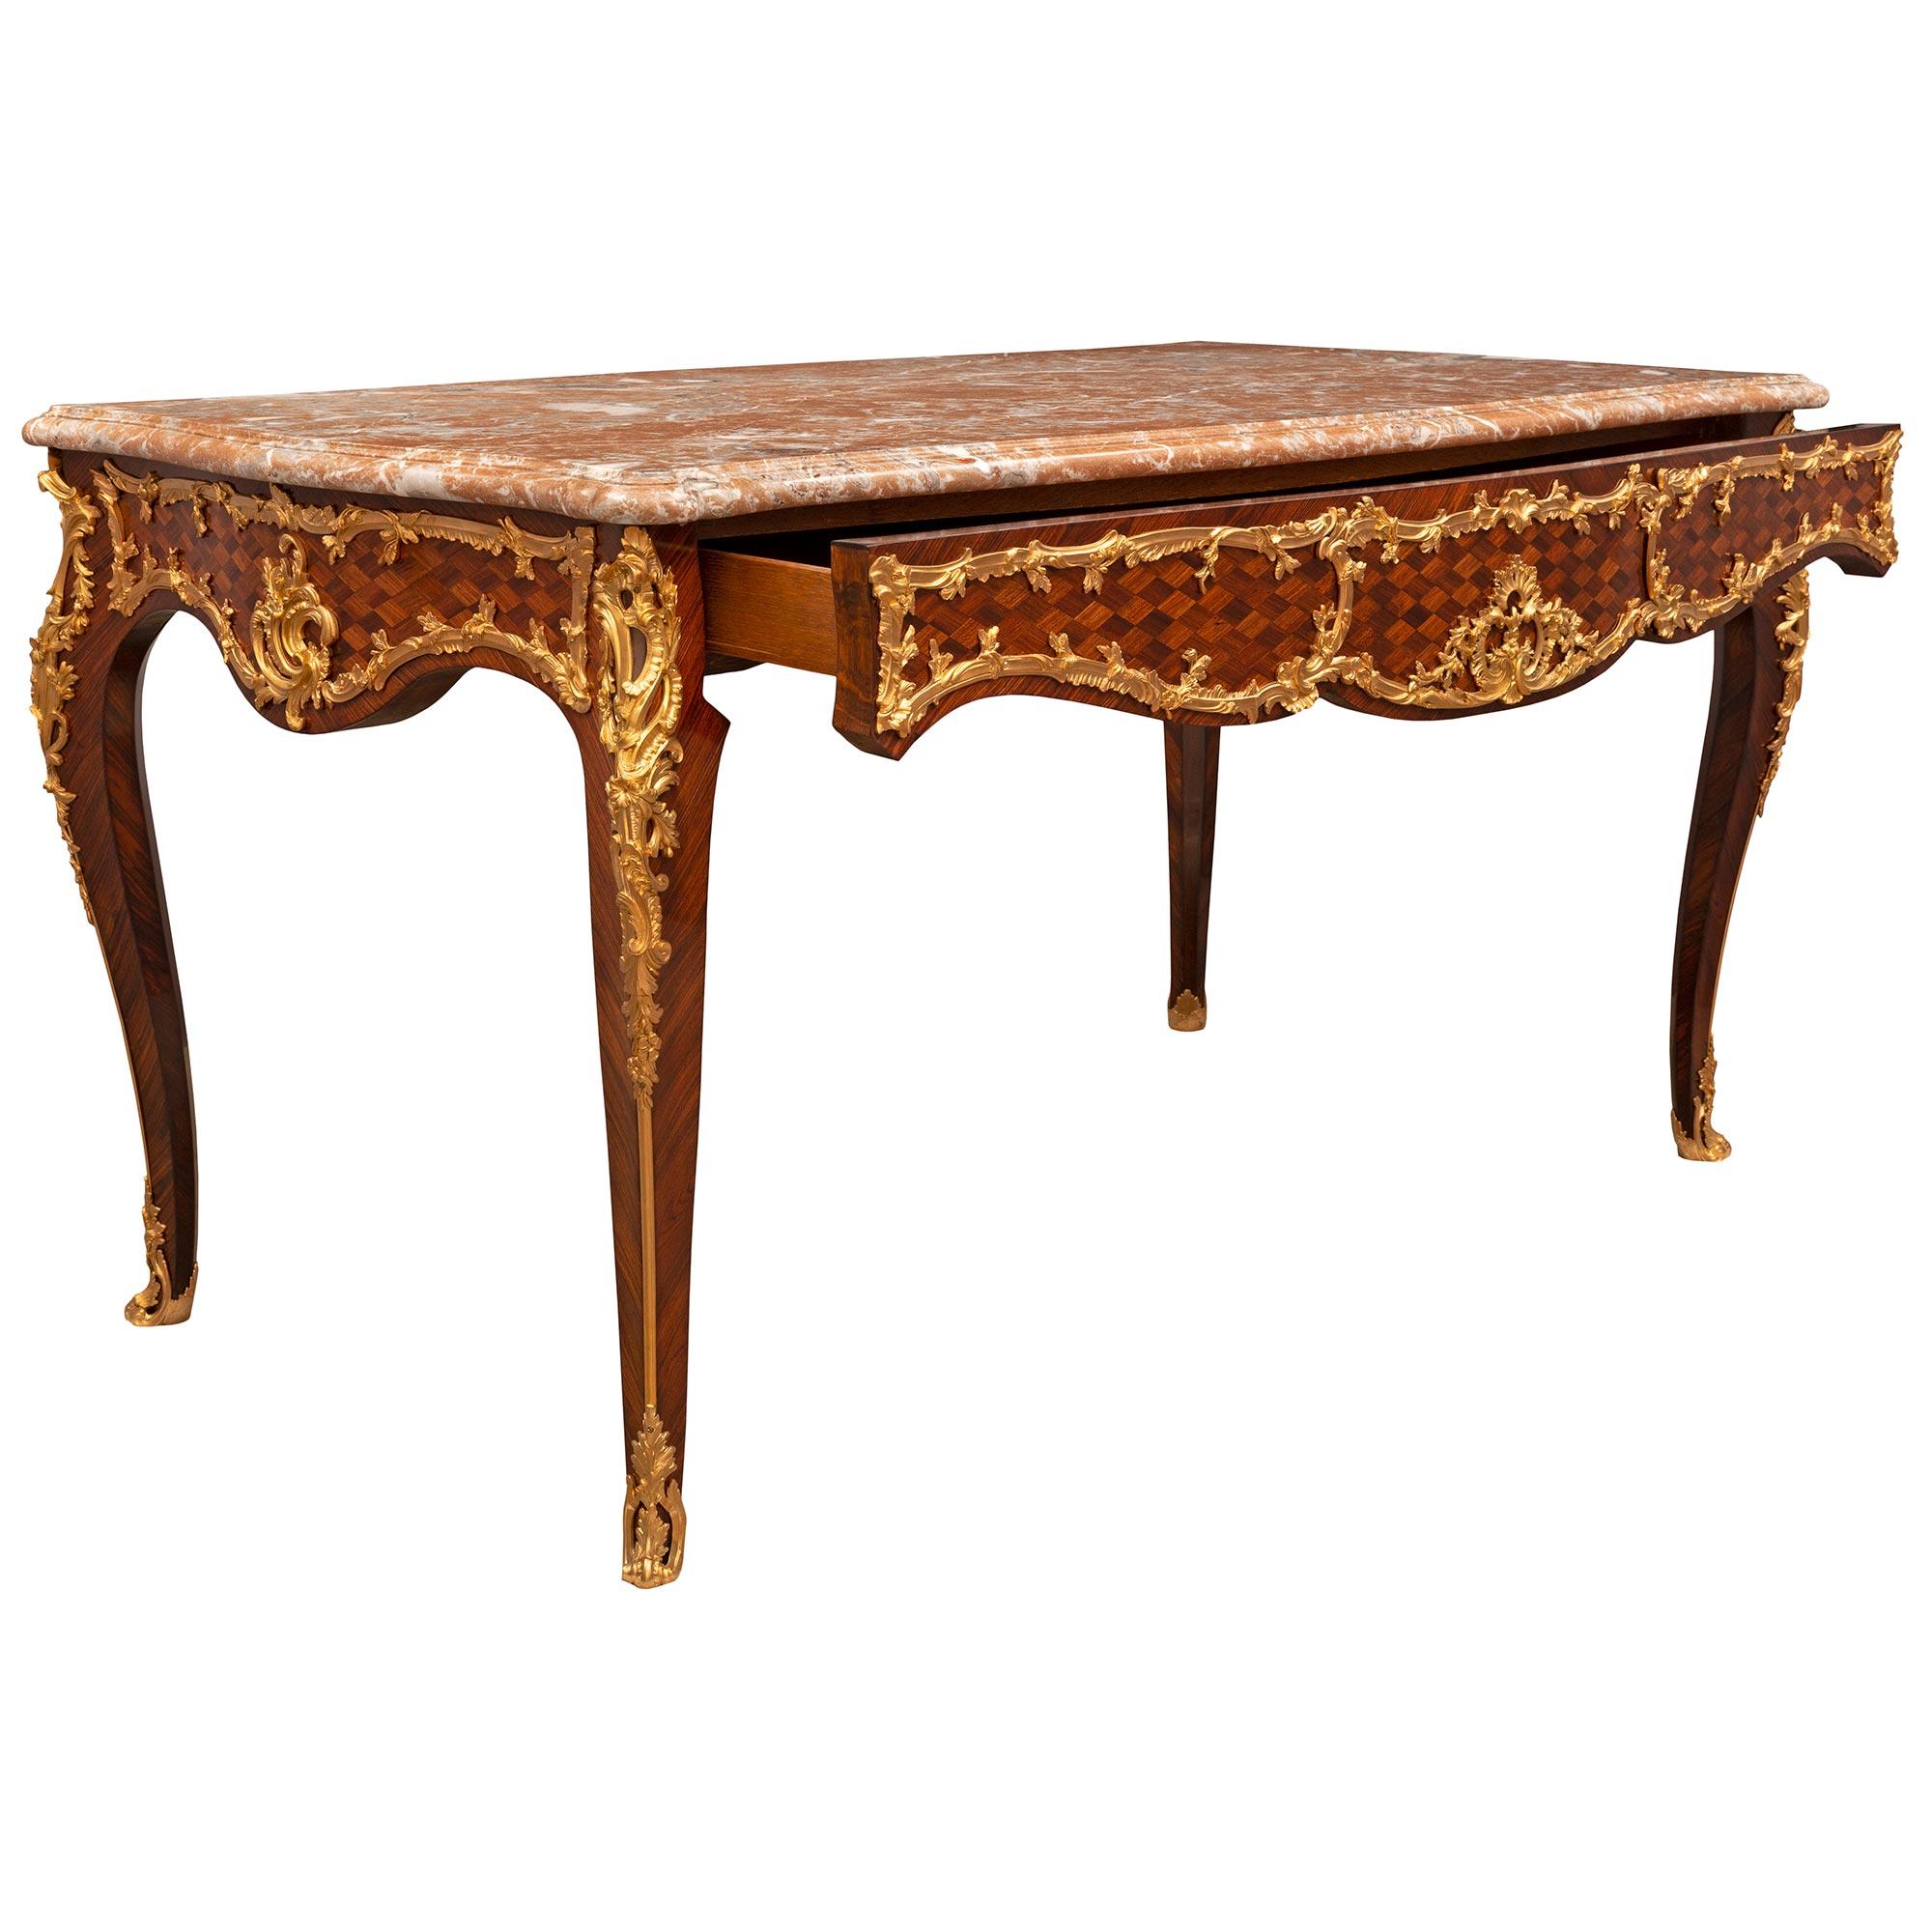 French 19th Century Louis XV Style Tulipwood and Ormolu Center Table For Sale 1